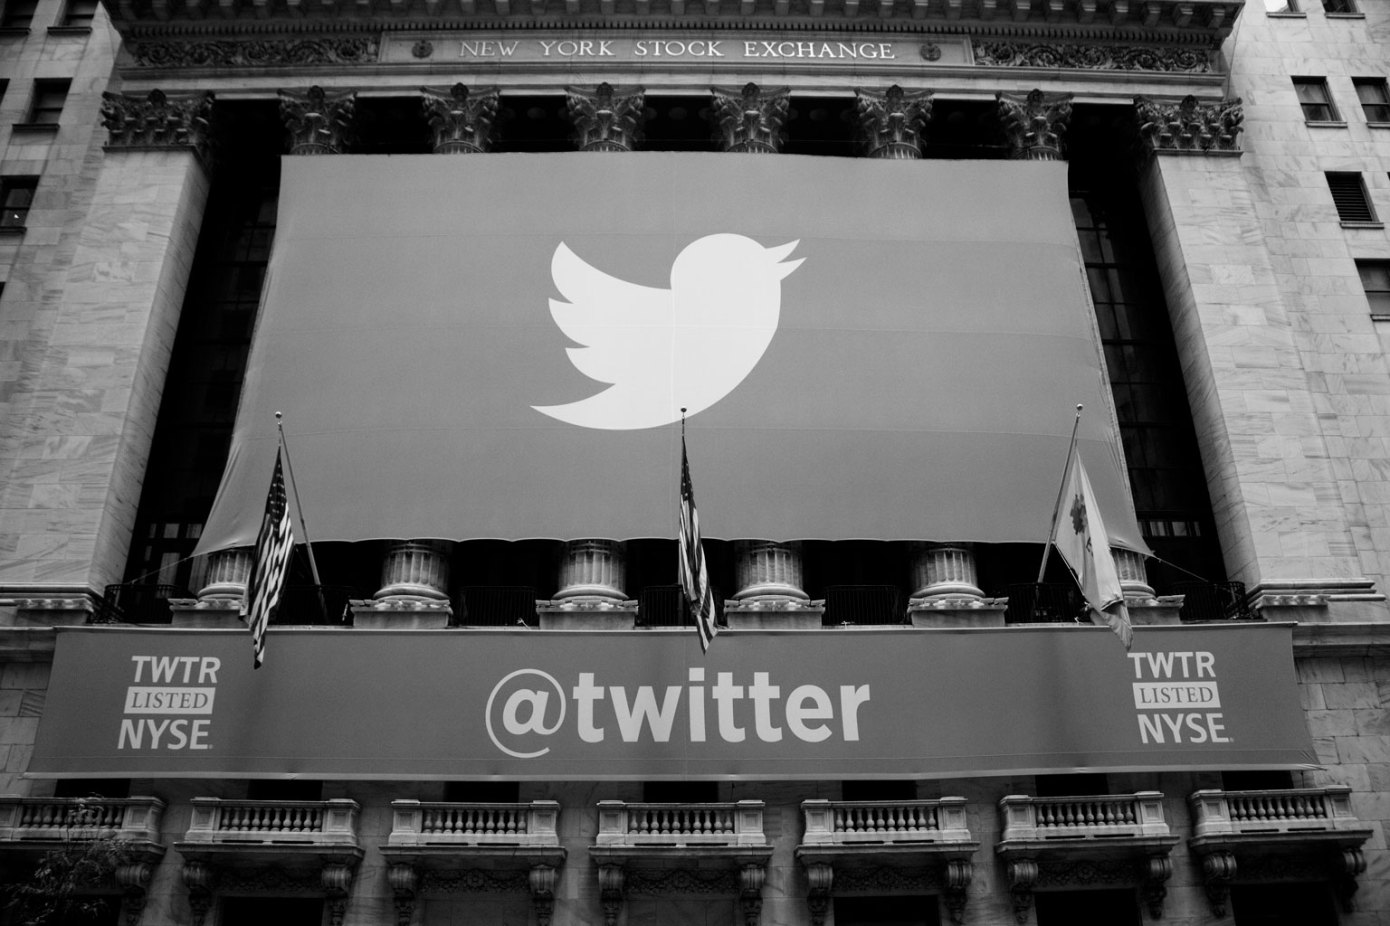 Daily Crunch: With Musk’s purchase completed, NYSE will delist Twitter stock on Election Day